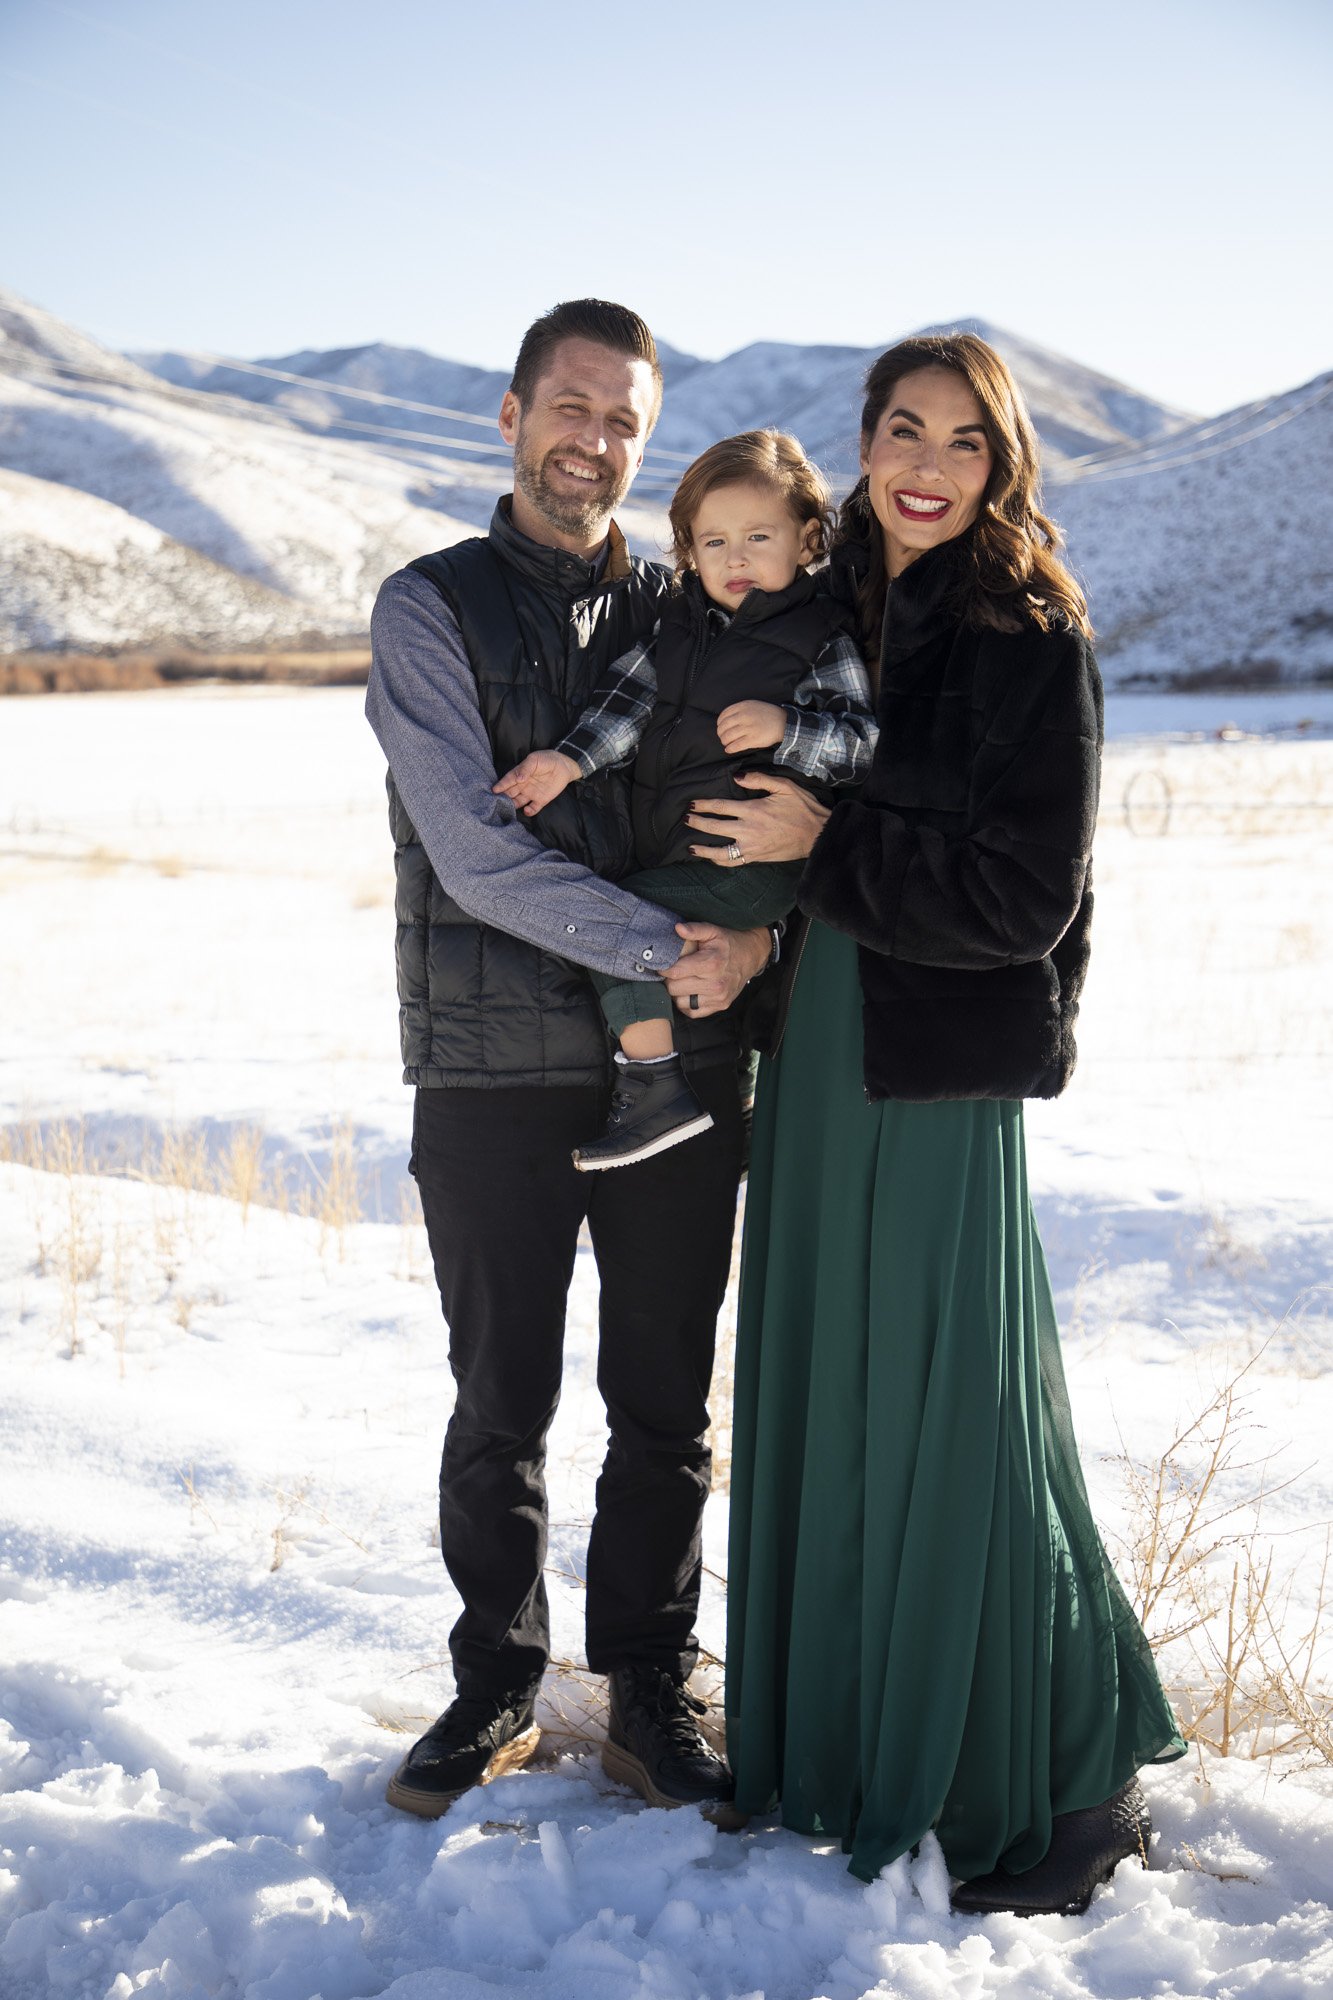 Drew family photos in Sun Valley, Idaho with photography by Tessa Sheehan